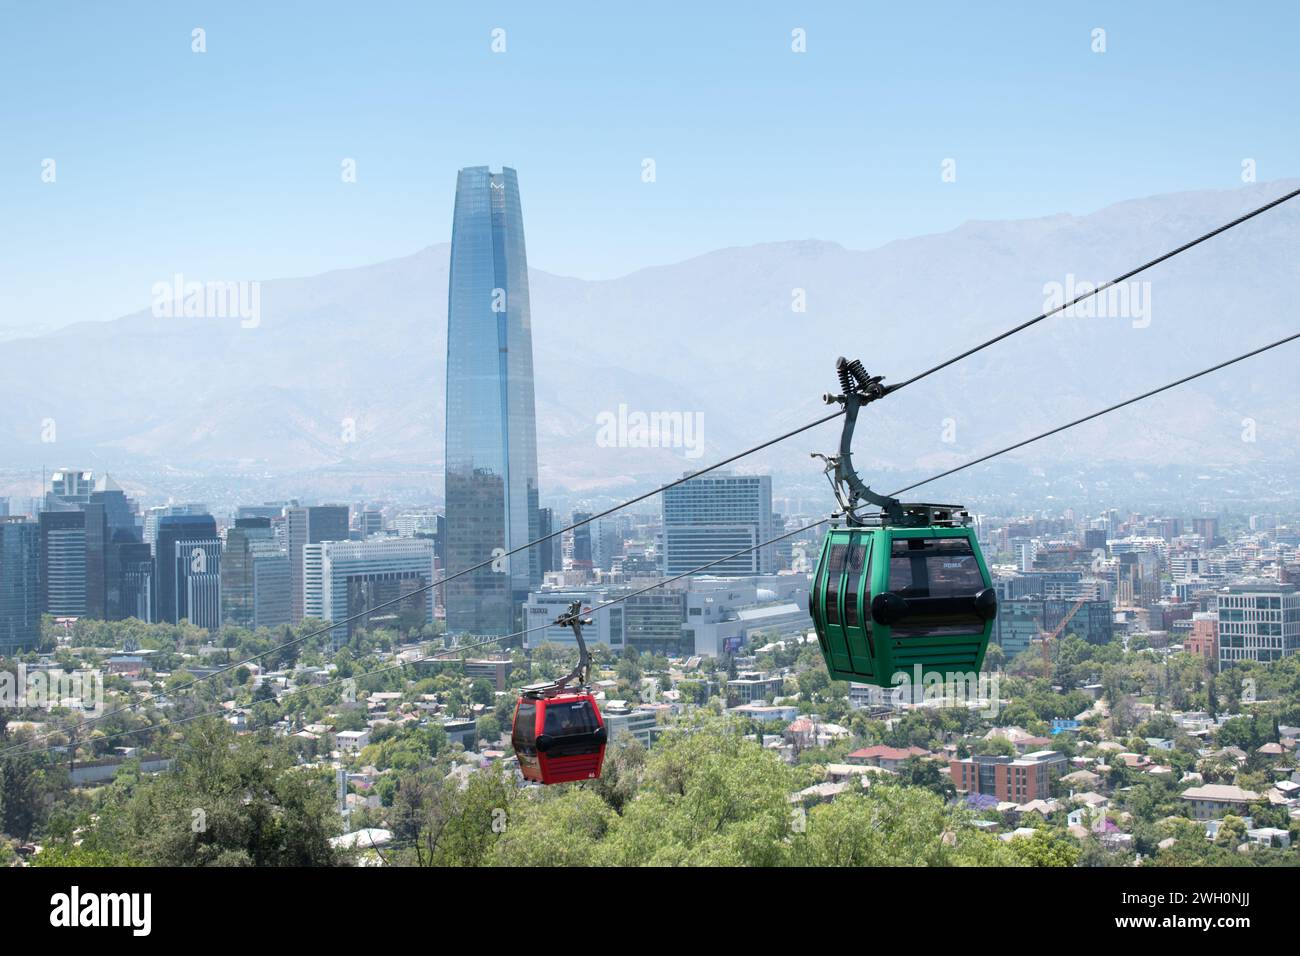 Urban landscape from Santiago's Metropolitan Park during summer, featuring the iconic Costanera Tower and cable car in the distance. Stock Photo